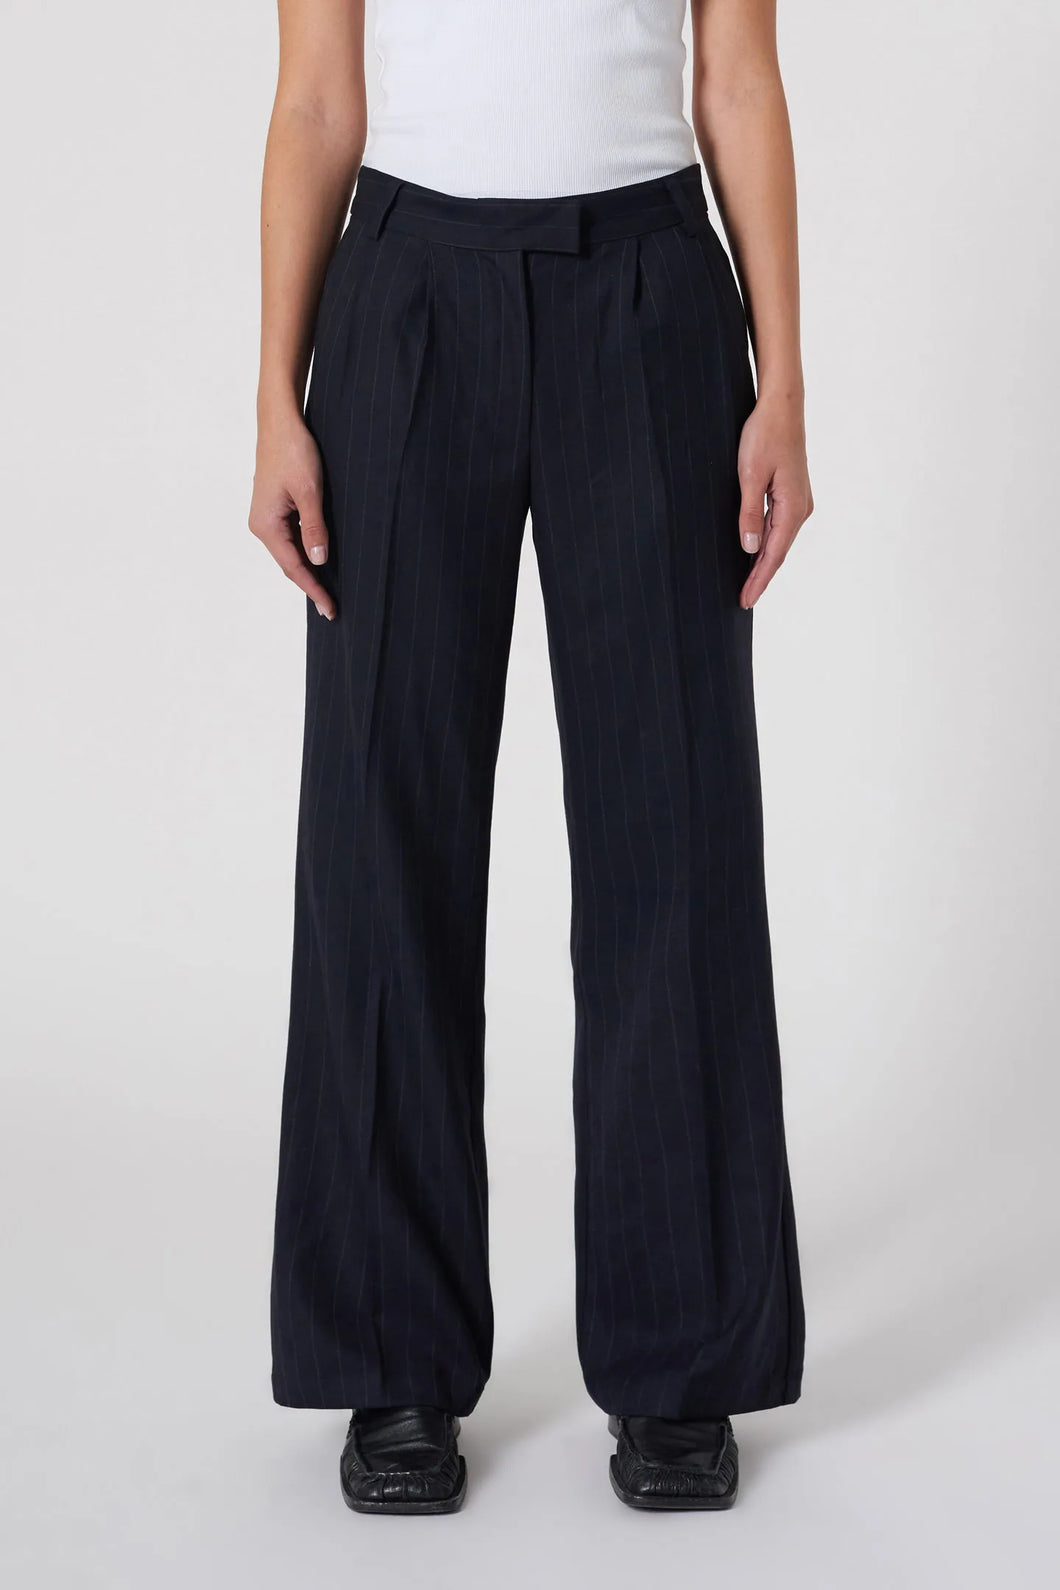 Coco Relaxed Pinstripe Pant | Navy